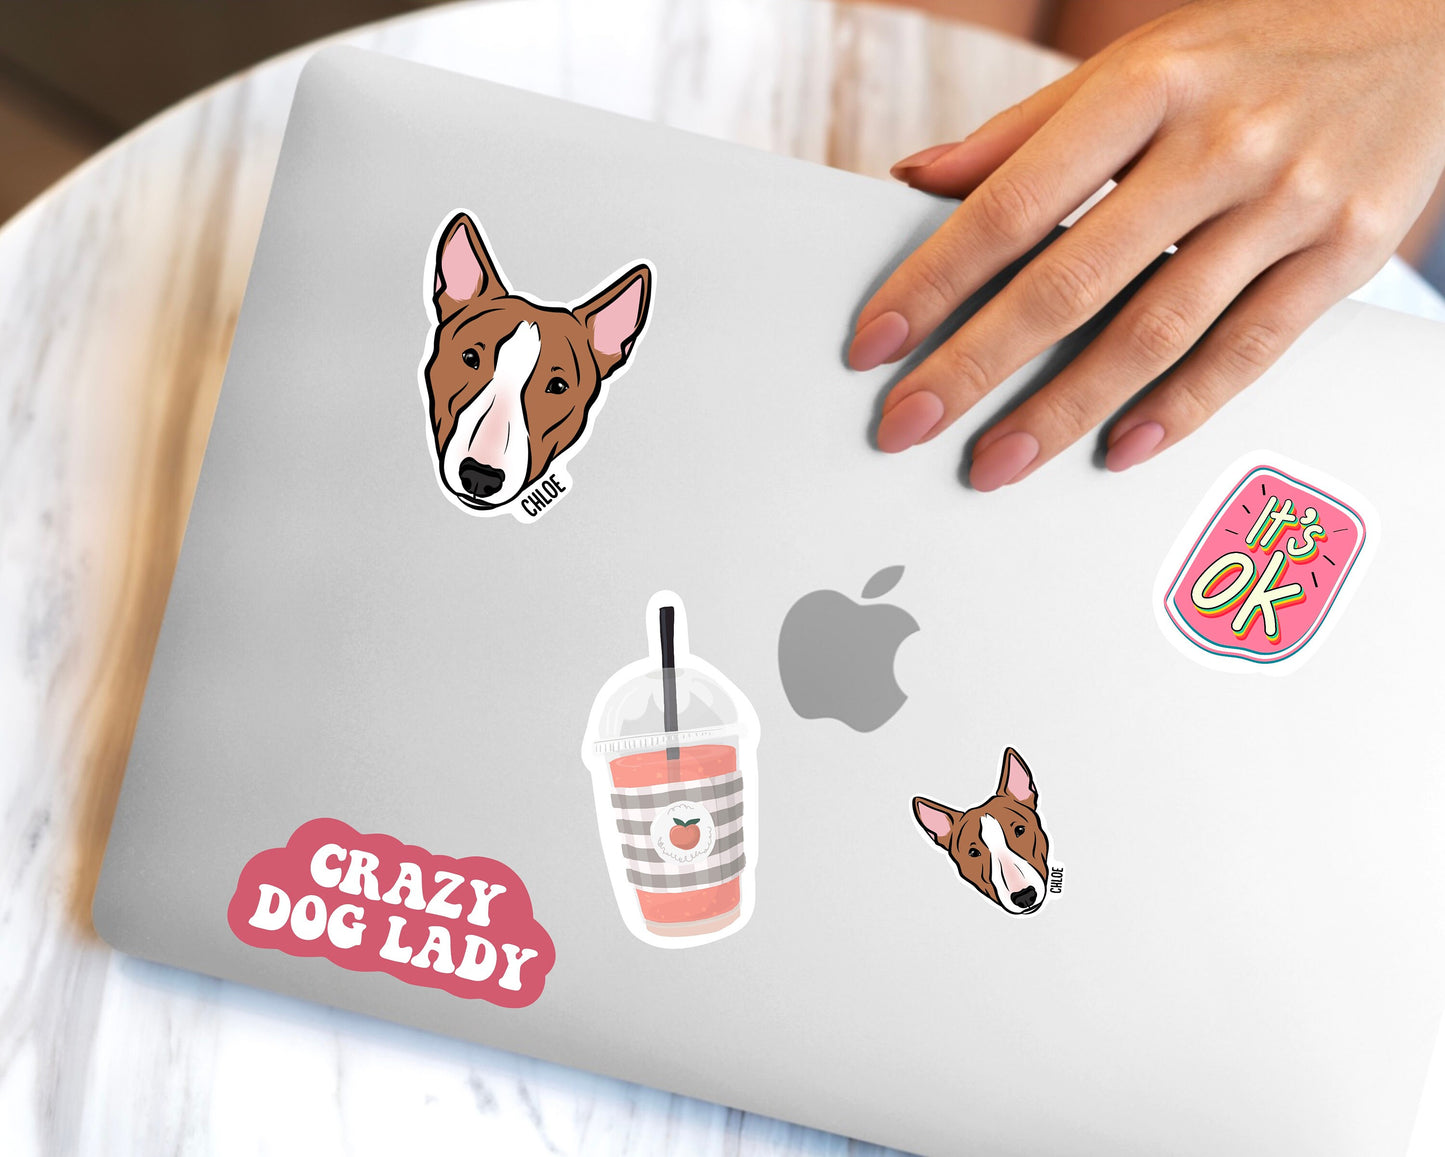 Bull Terrier Face Stickers